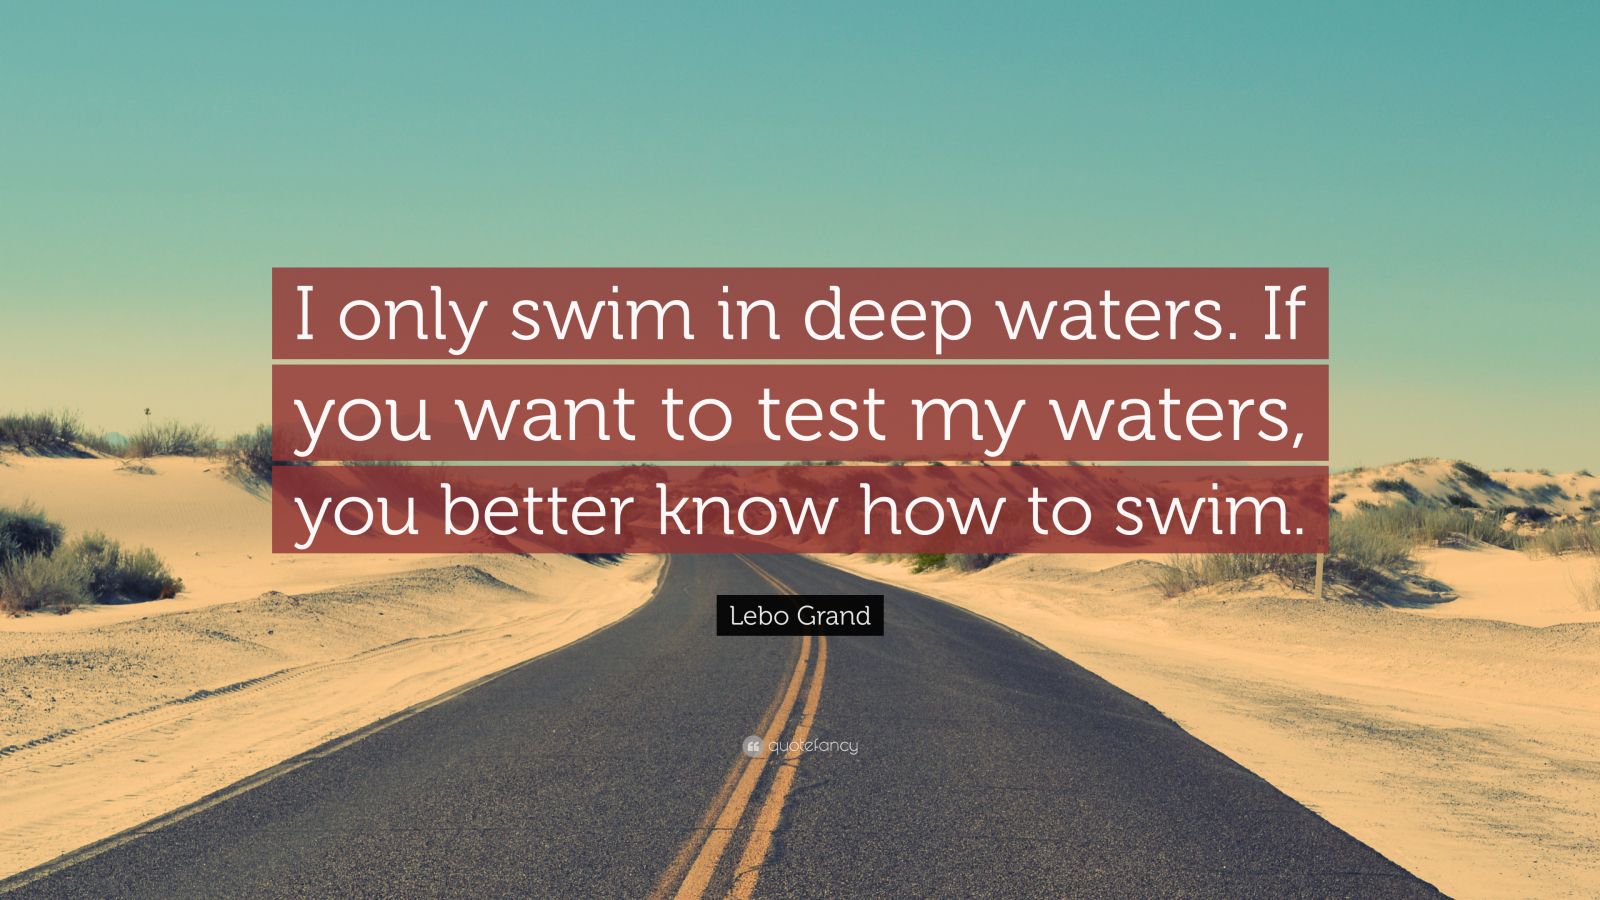 Lebo Grand Quote: “I only swim in deep waters. If you want to test my  waters